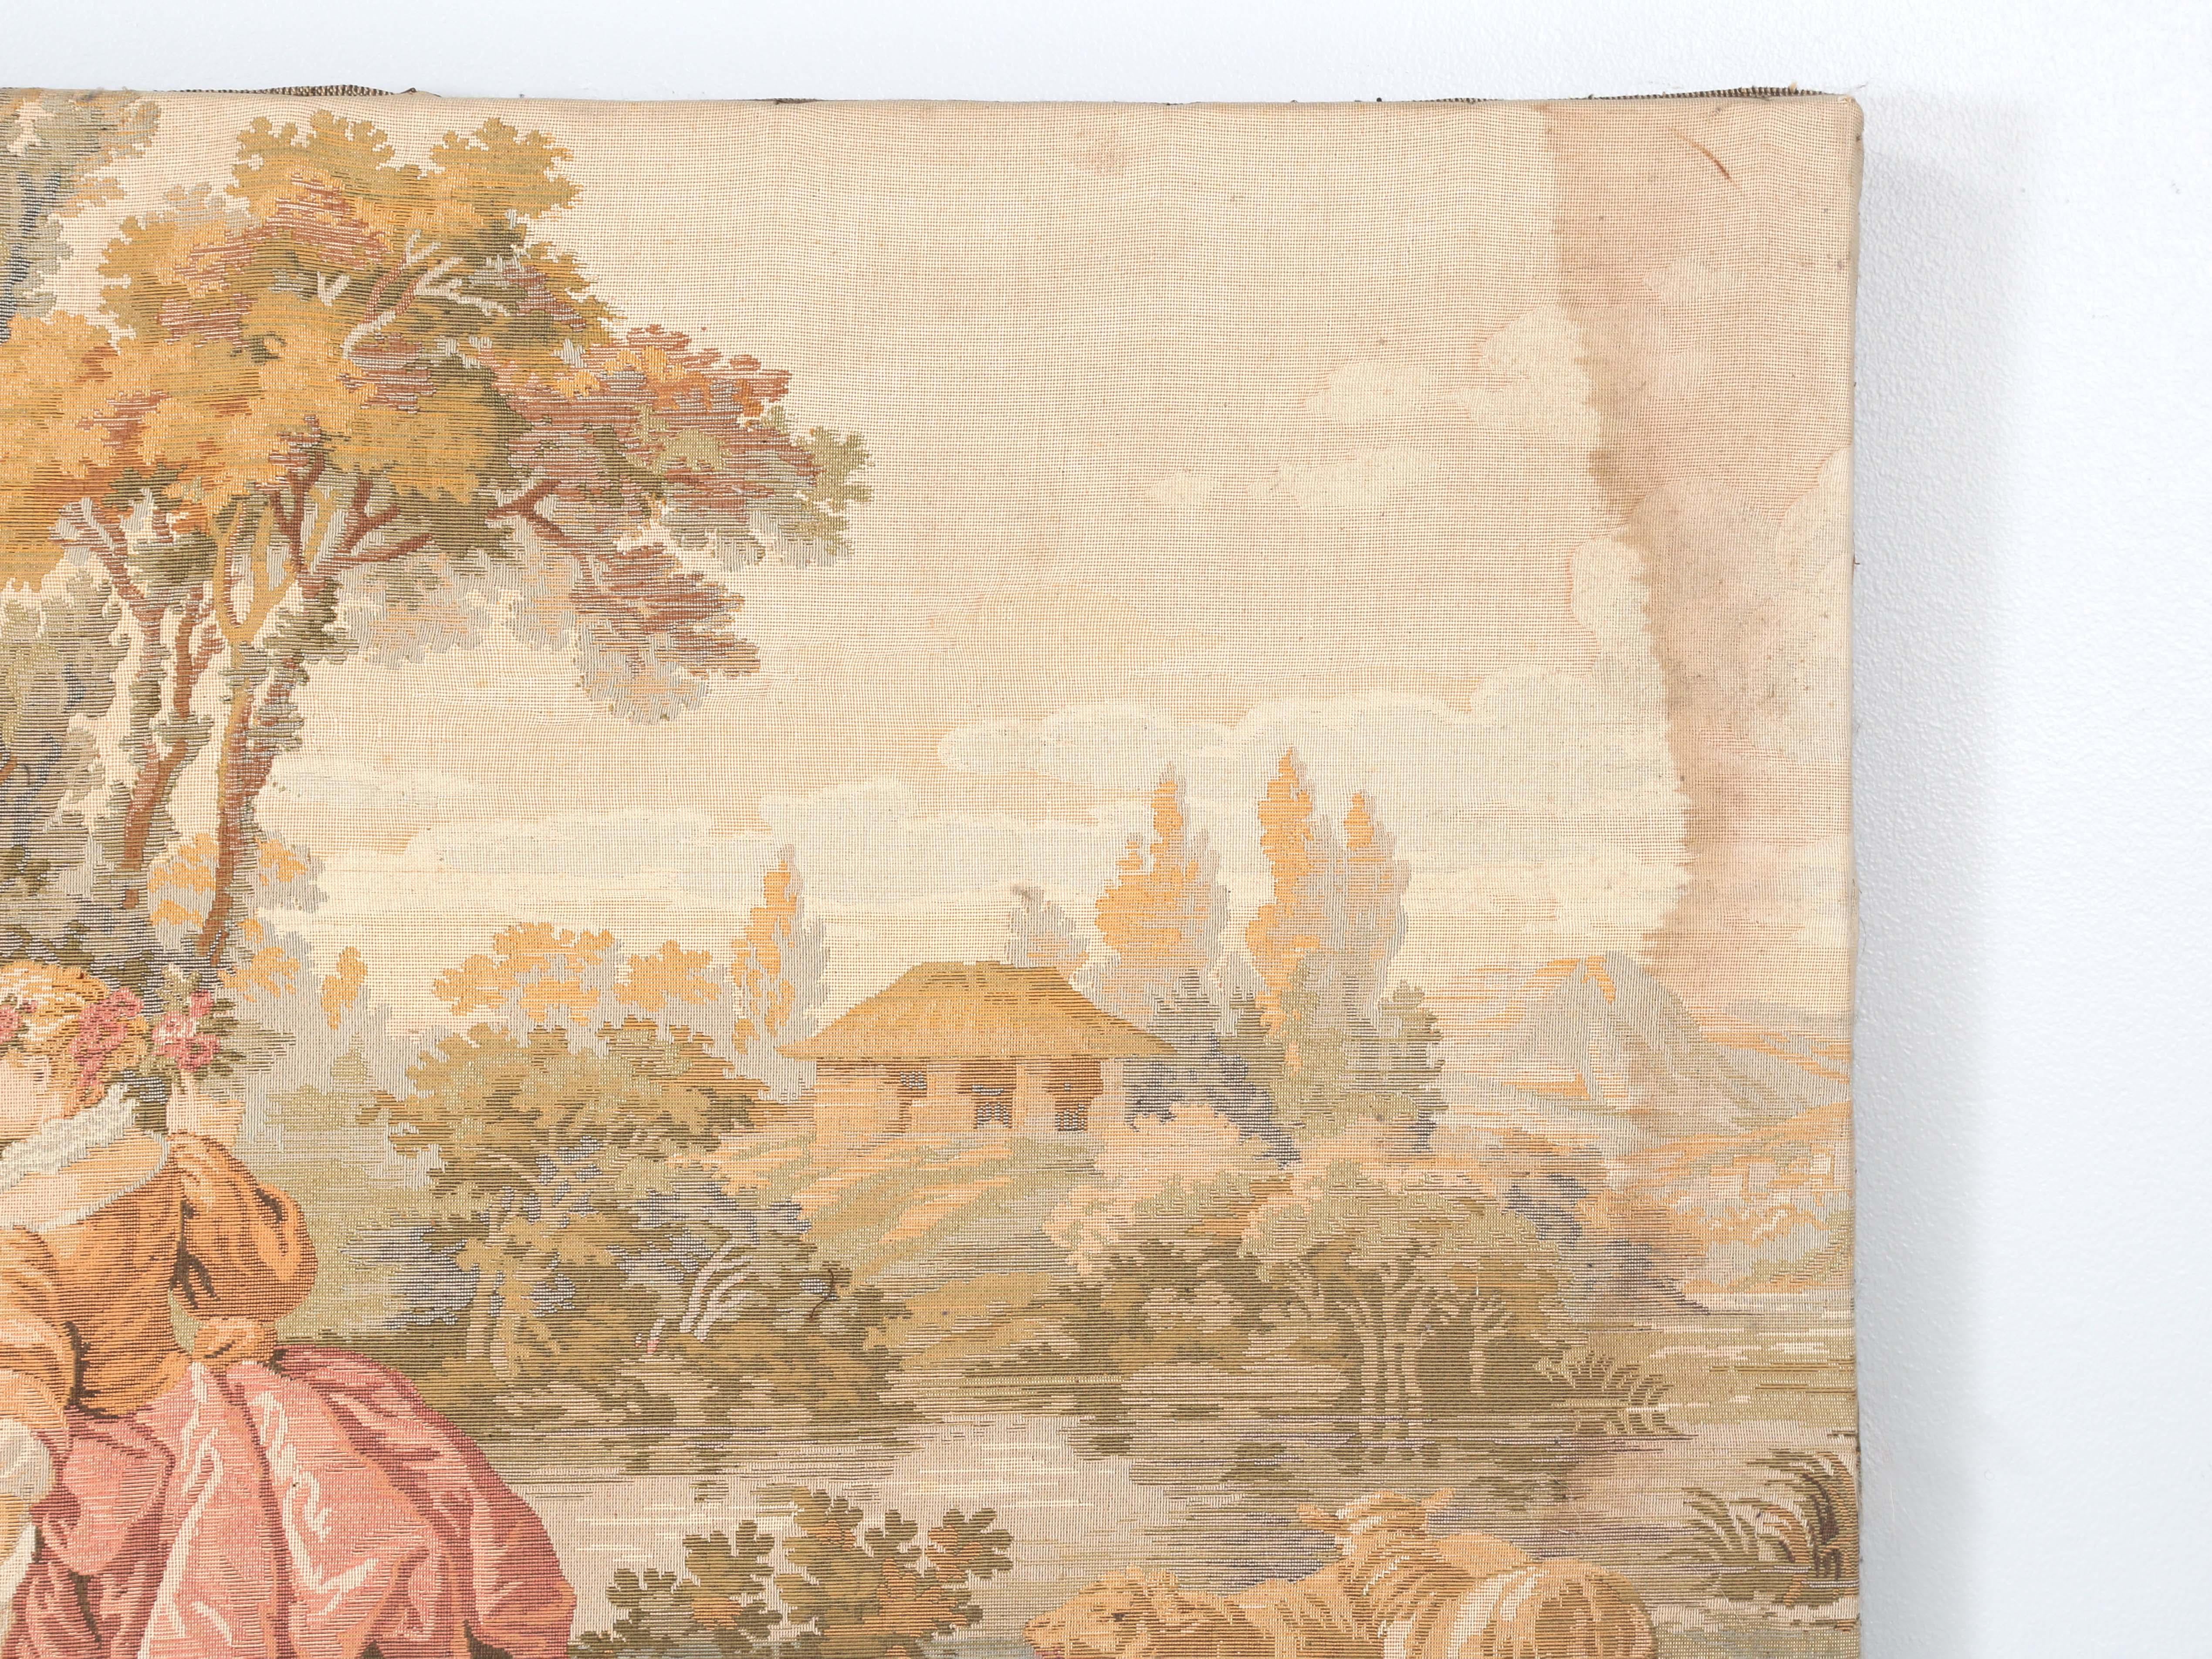 Antique French Wall Tapestry c1900-1920 For Sale 4